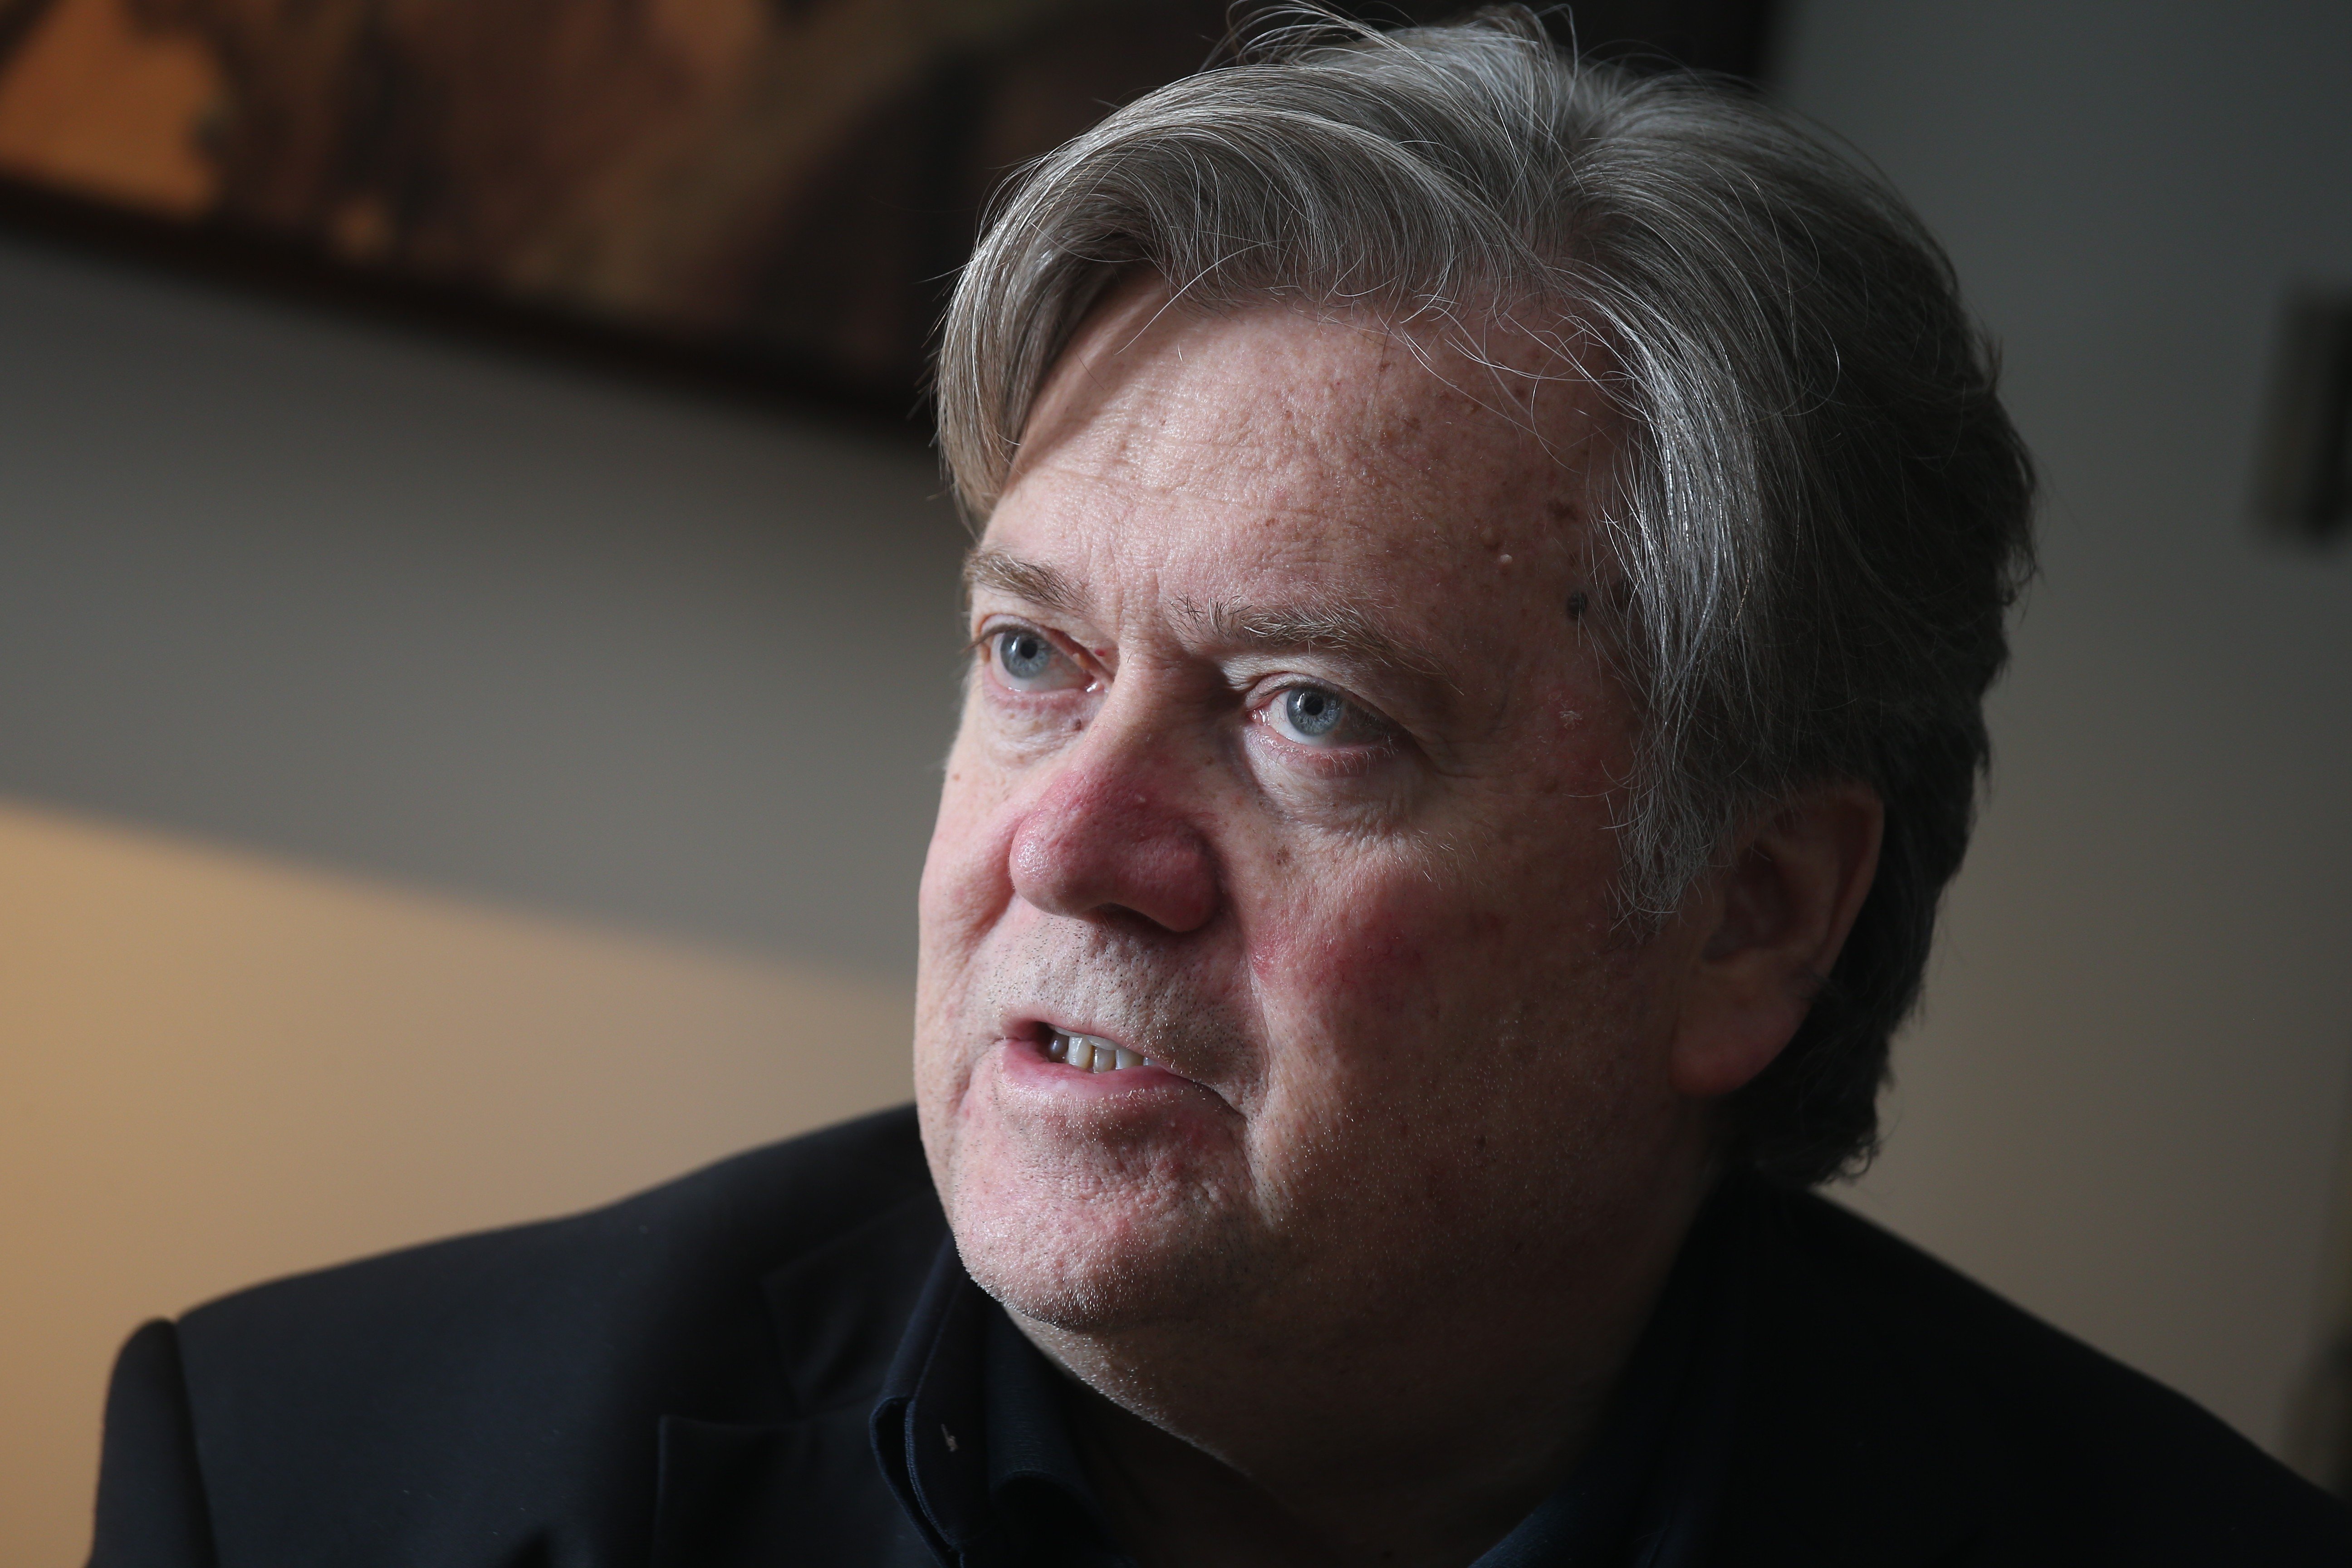 Former White House strategist Steve Bannon says trade conflict between the US and China can be avoided. Photo: K Y Cheng